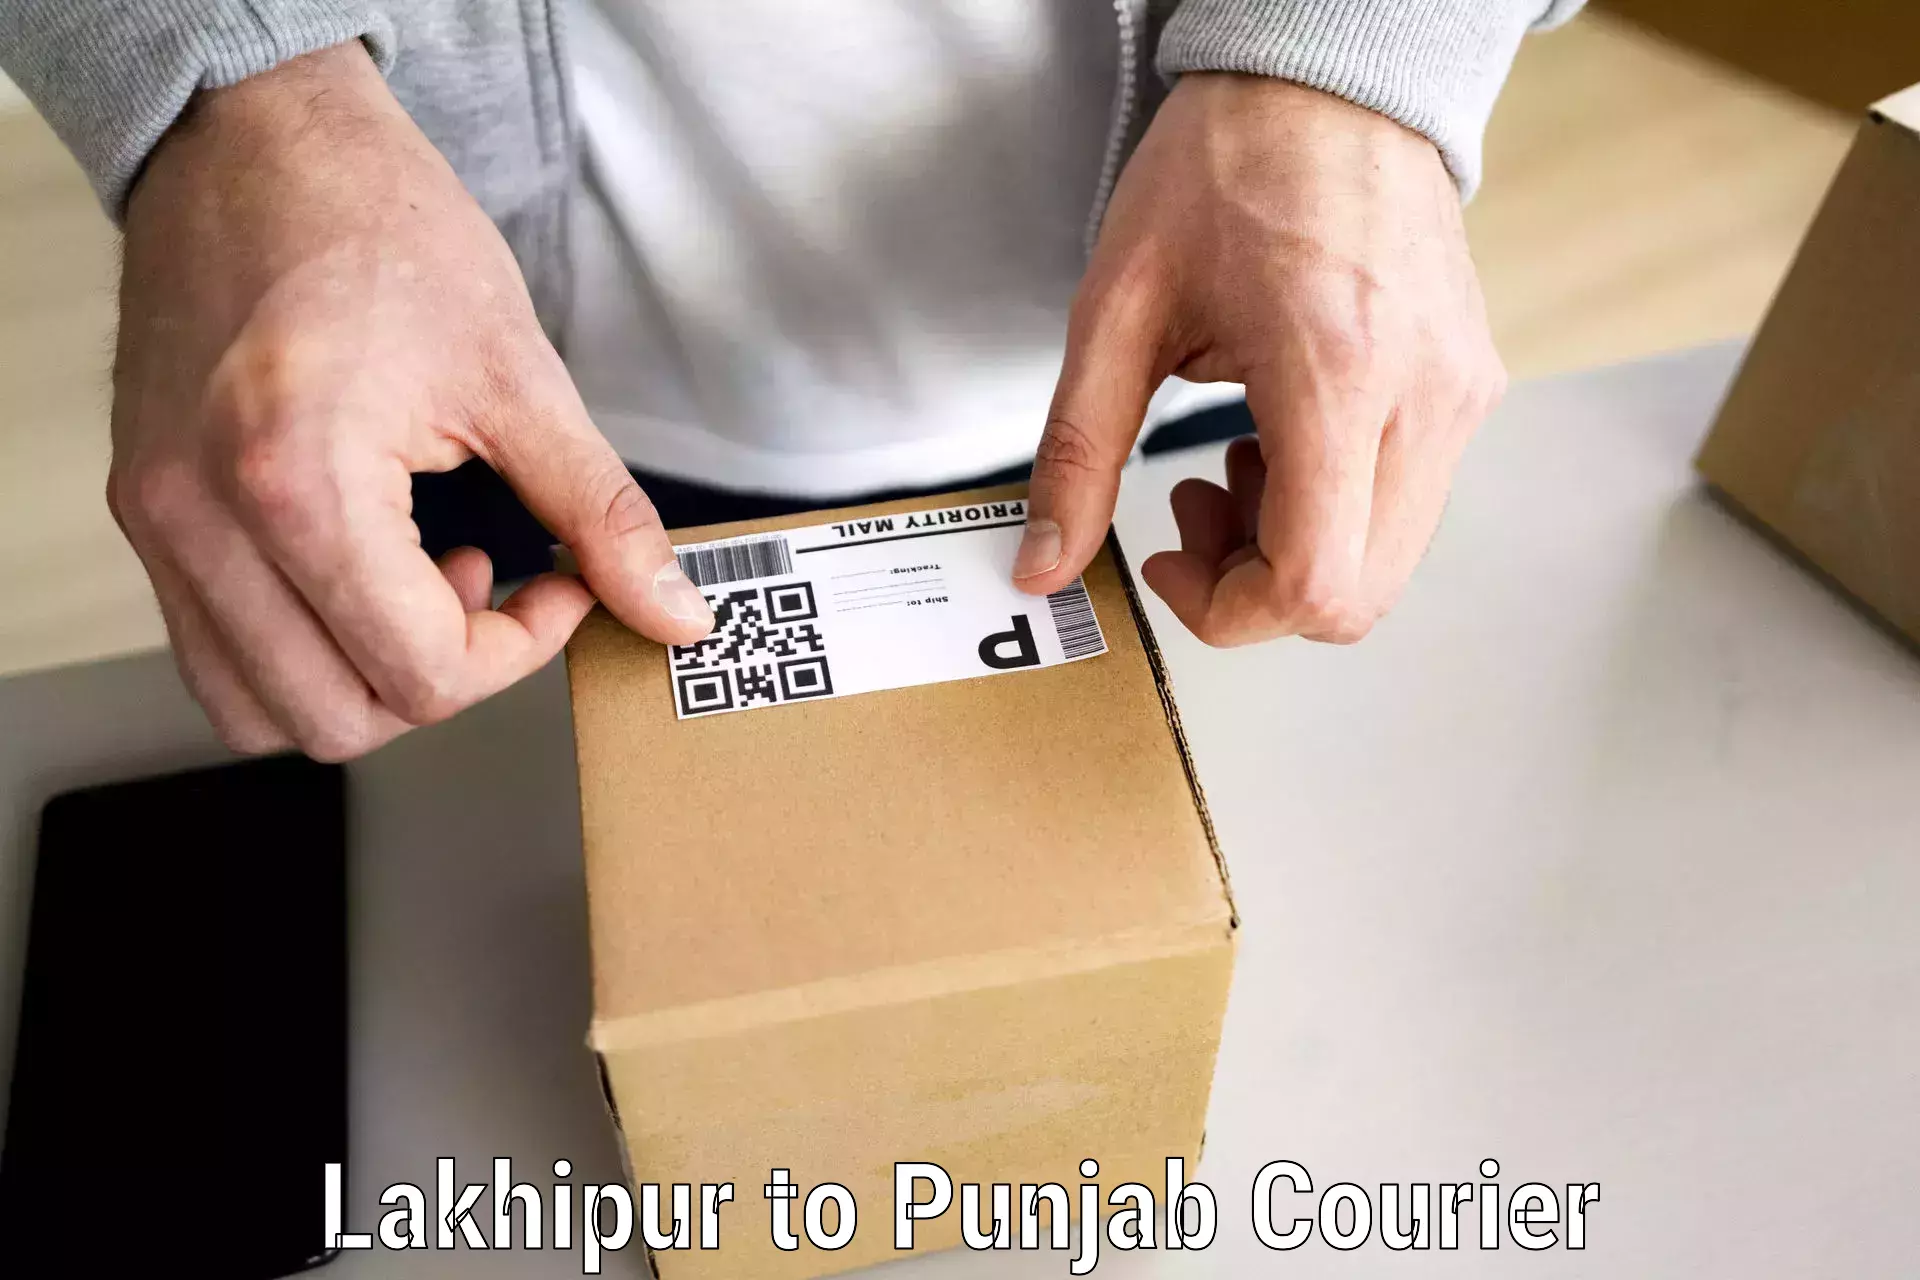 Hassle-free relocation Lakhipur to Dhuri